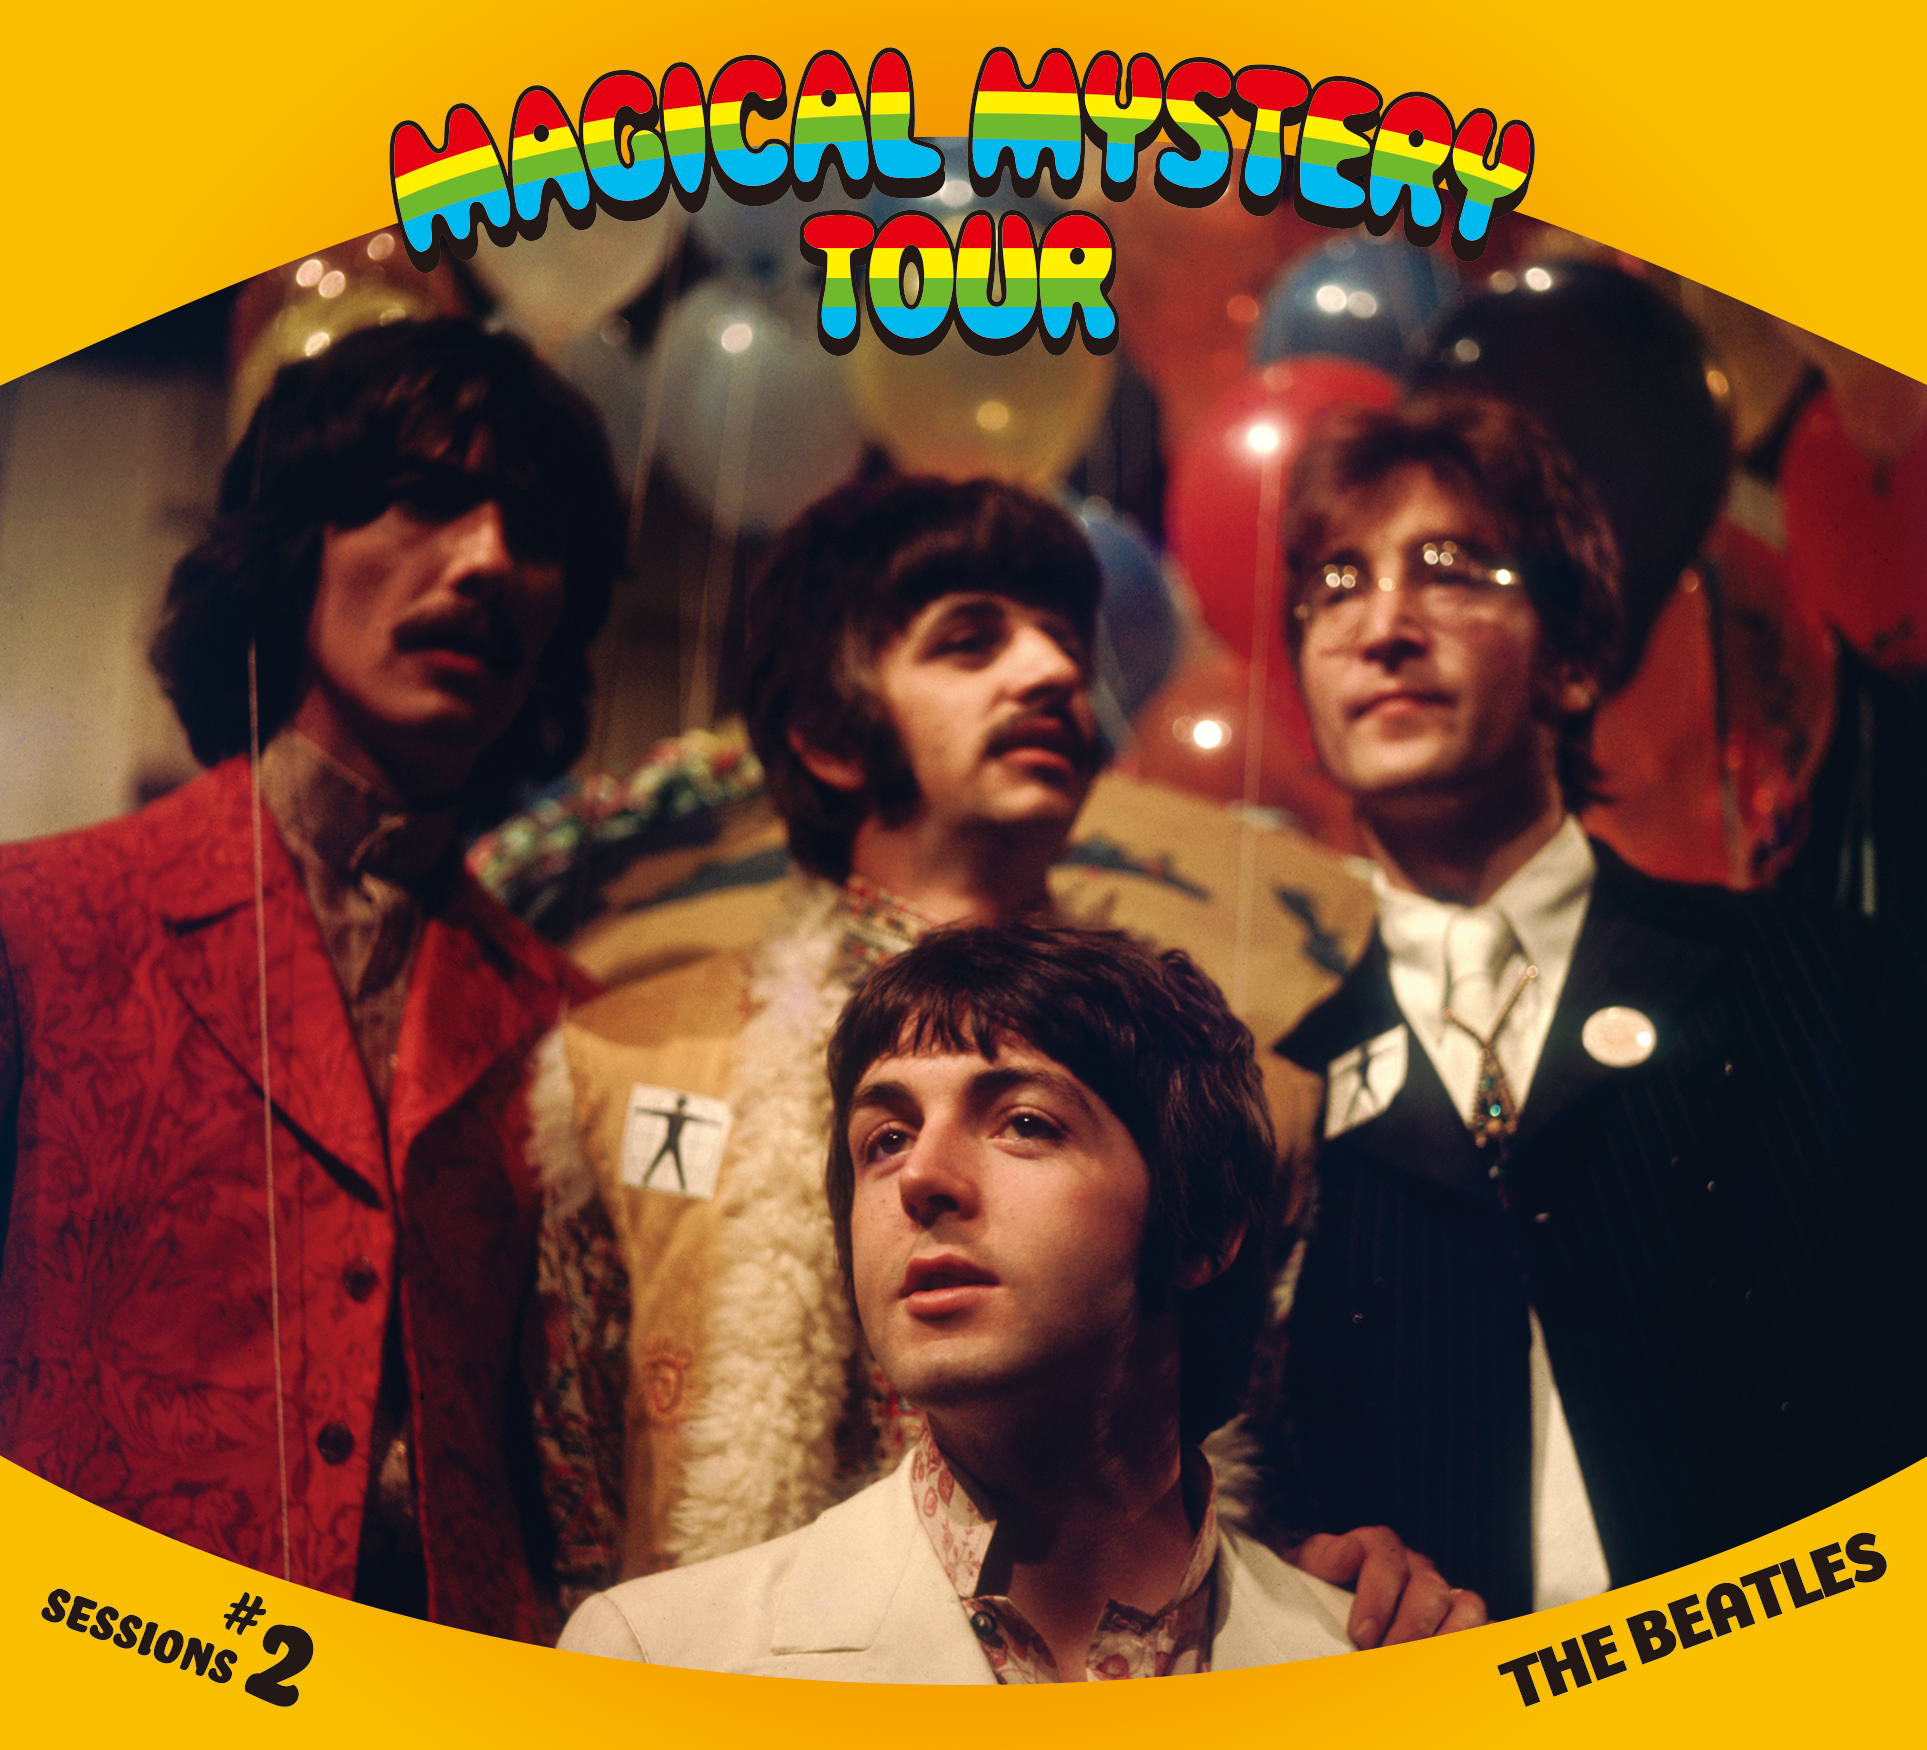 THE BEATLES / MAGICAL MYSTERY TOUR SESSIONS #2